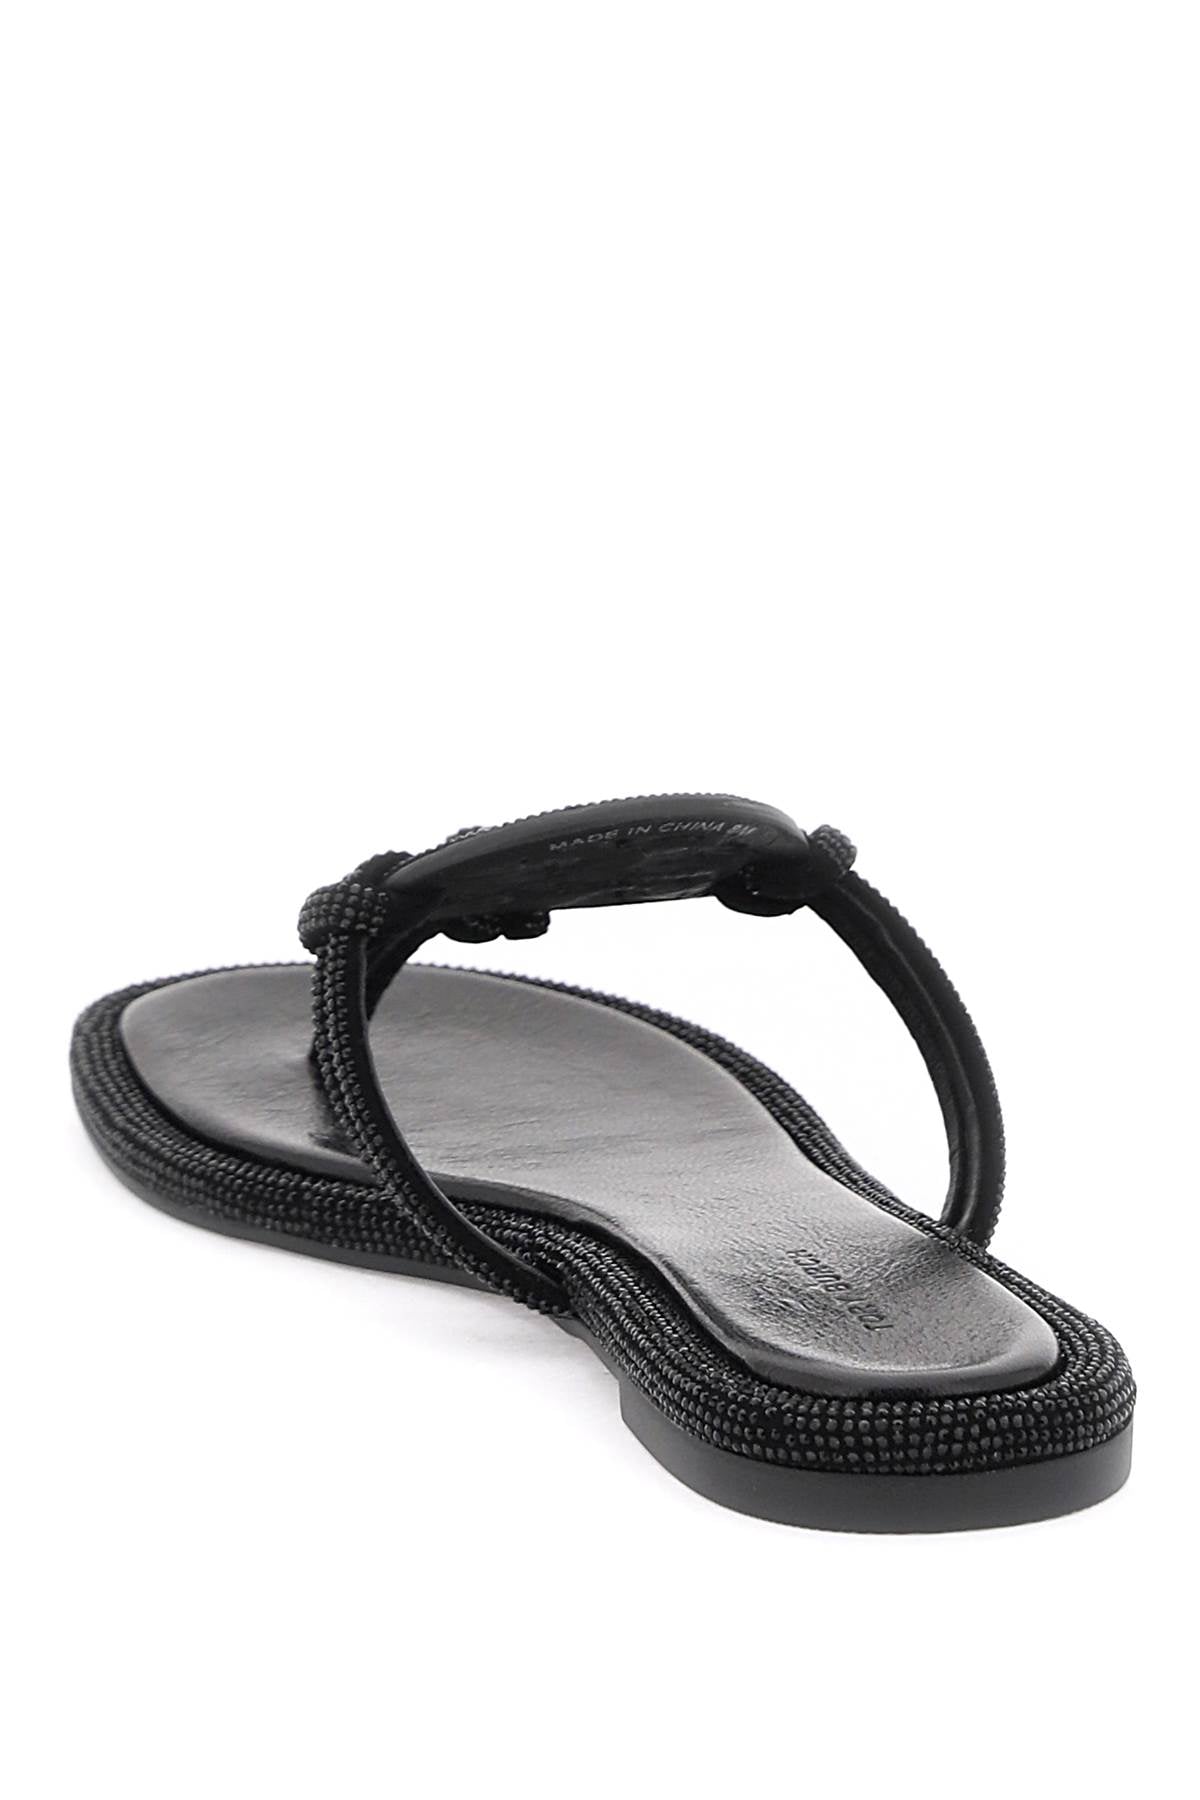 Tory burch pavé leather thong sandals-2